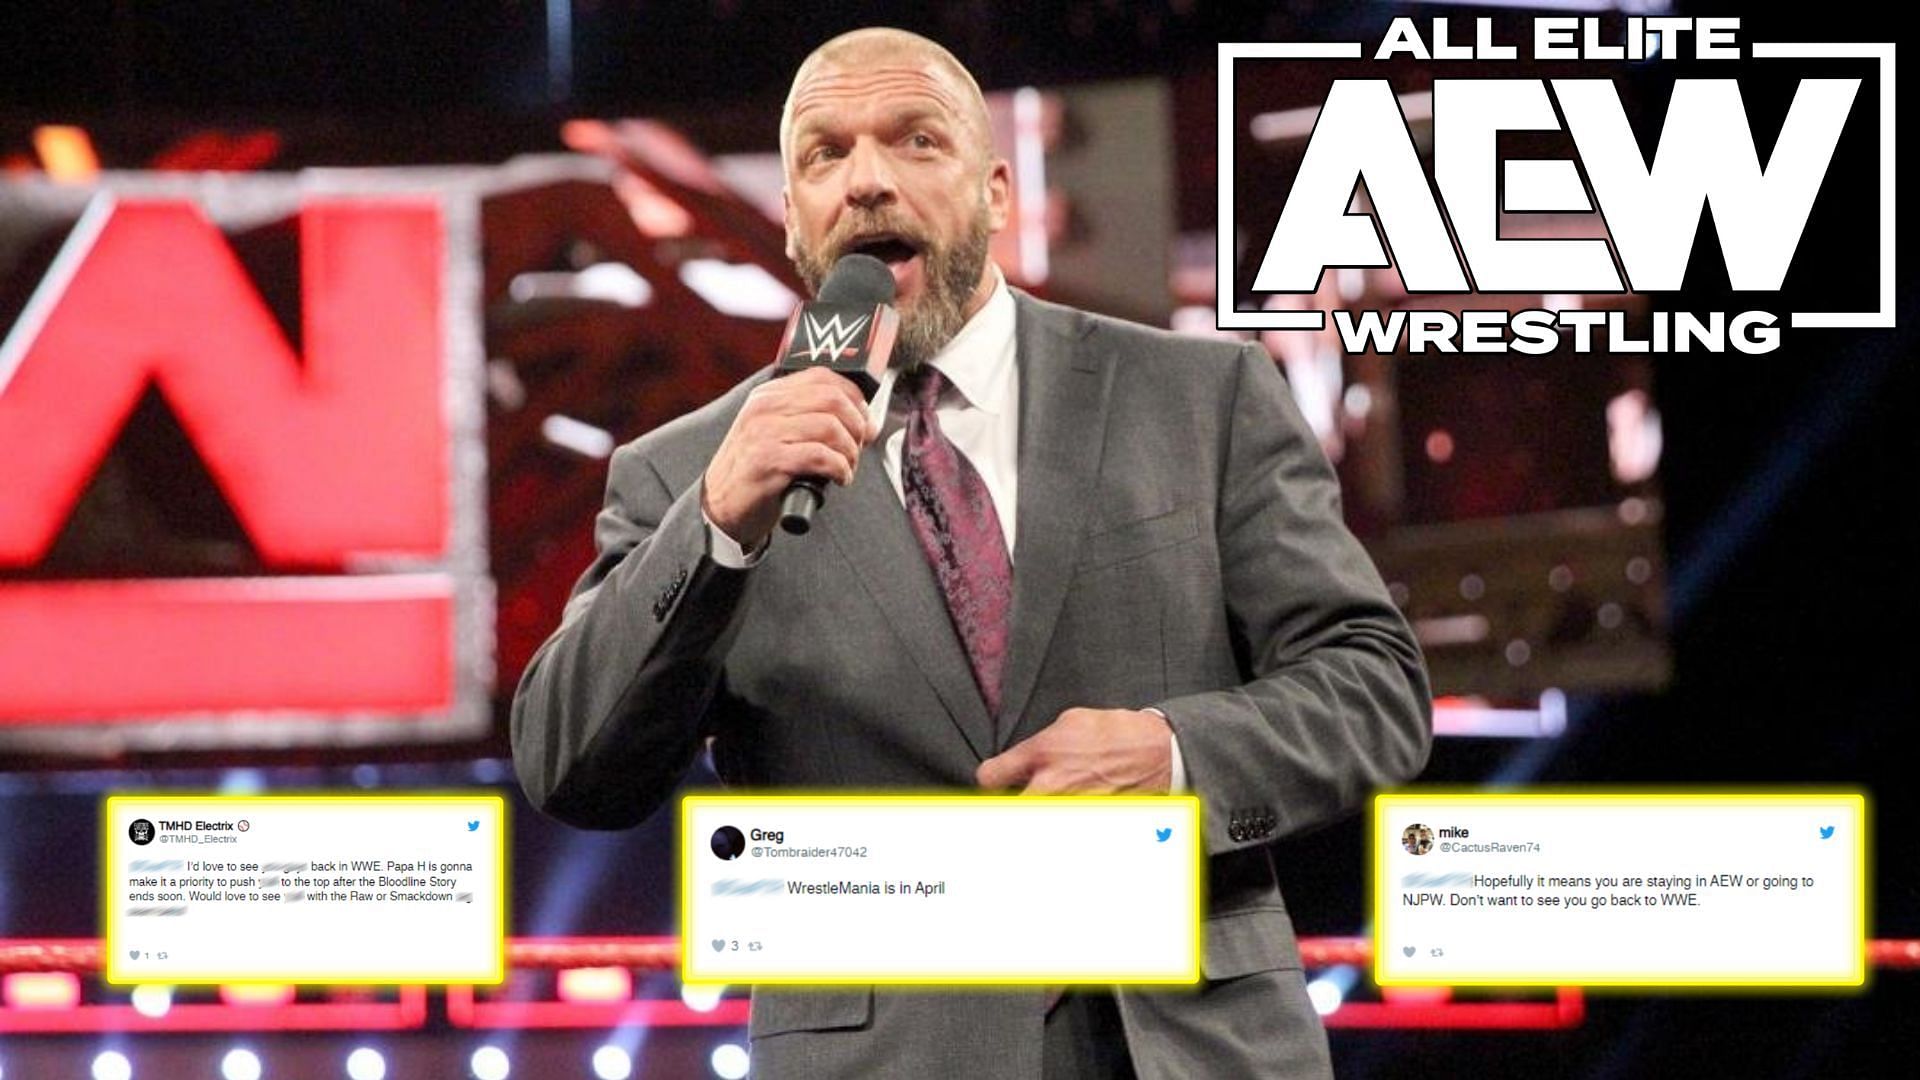 It seems like Triple H is gaining ground on snatching this star from AEW.